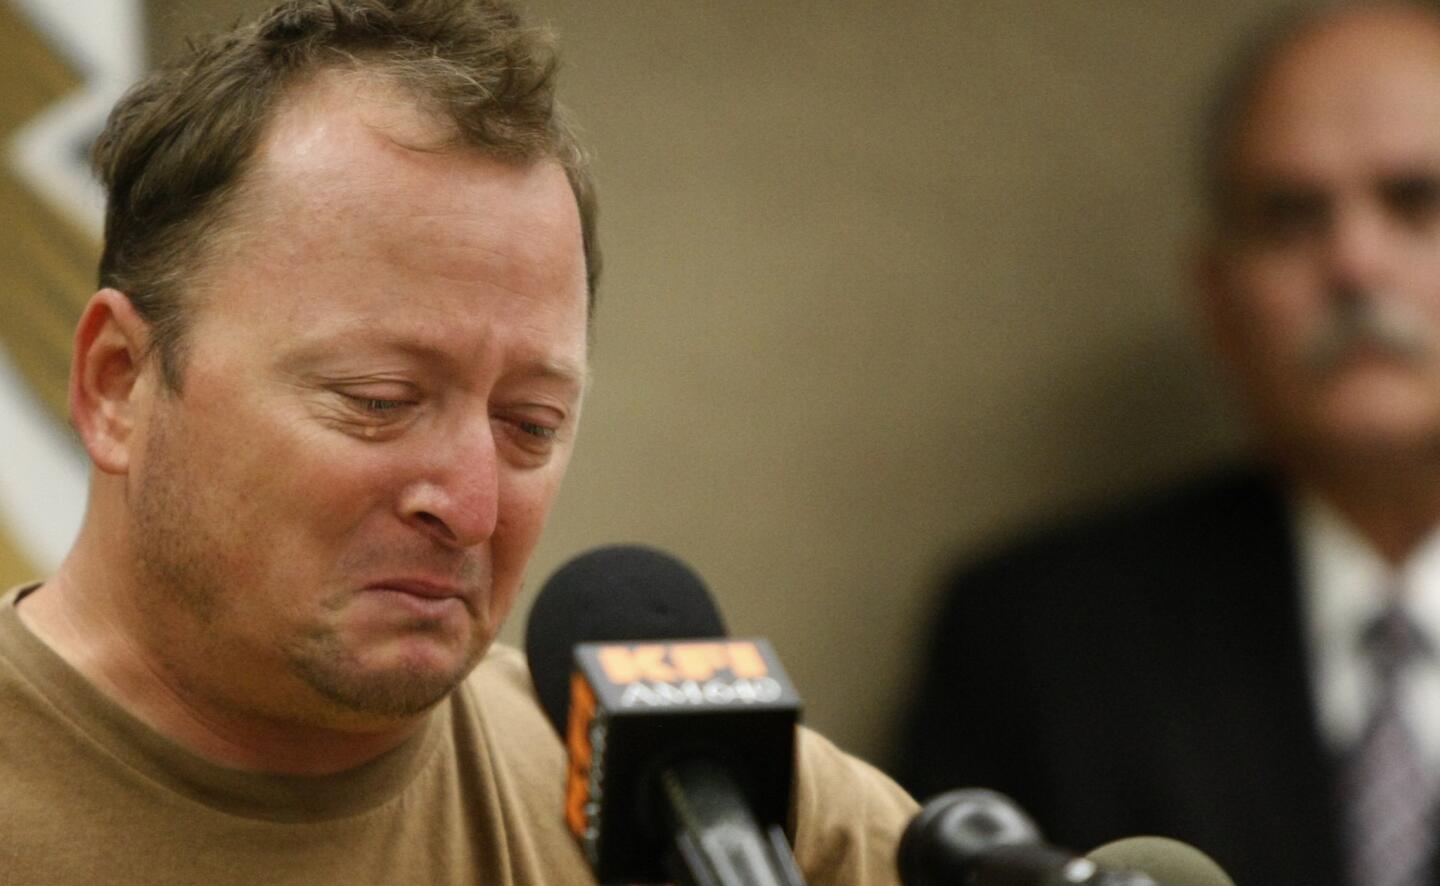 "It's not really the outcome we were looking for," Michael McStay said during a news conference in November 2013 after the remains of his brother, sister-in-law and nephews were identified. "But it gives us courage to know they're together and they're in a better place."